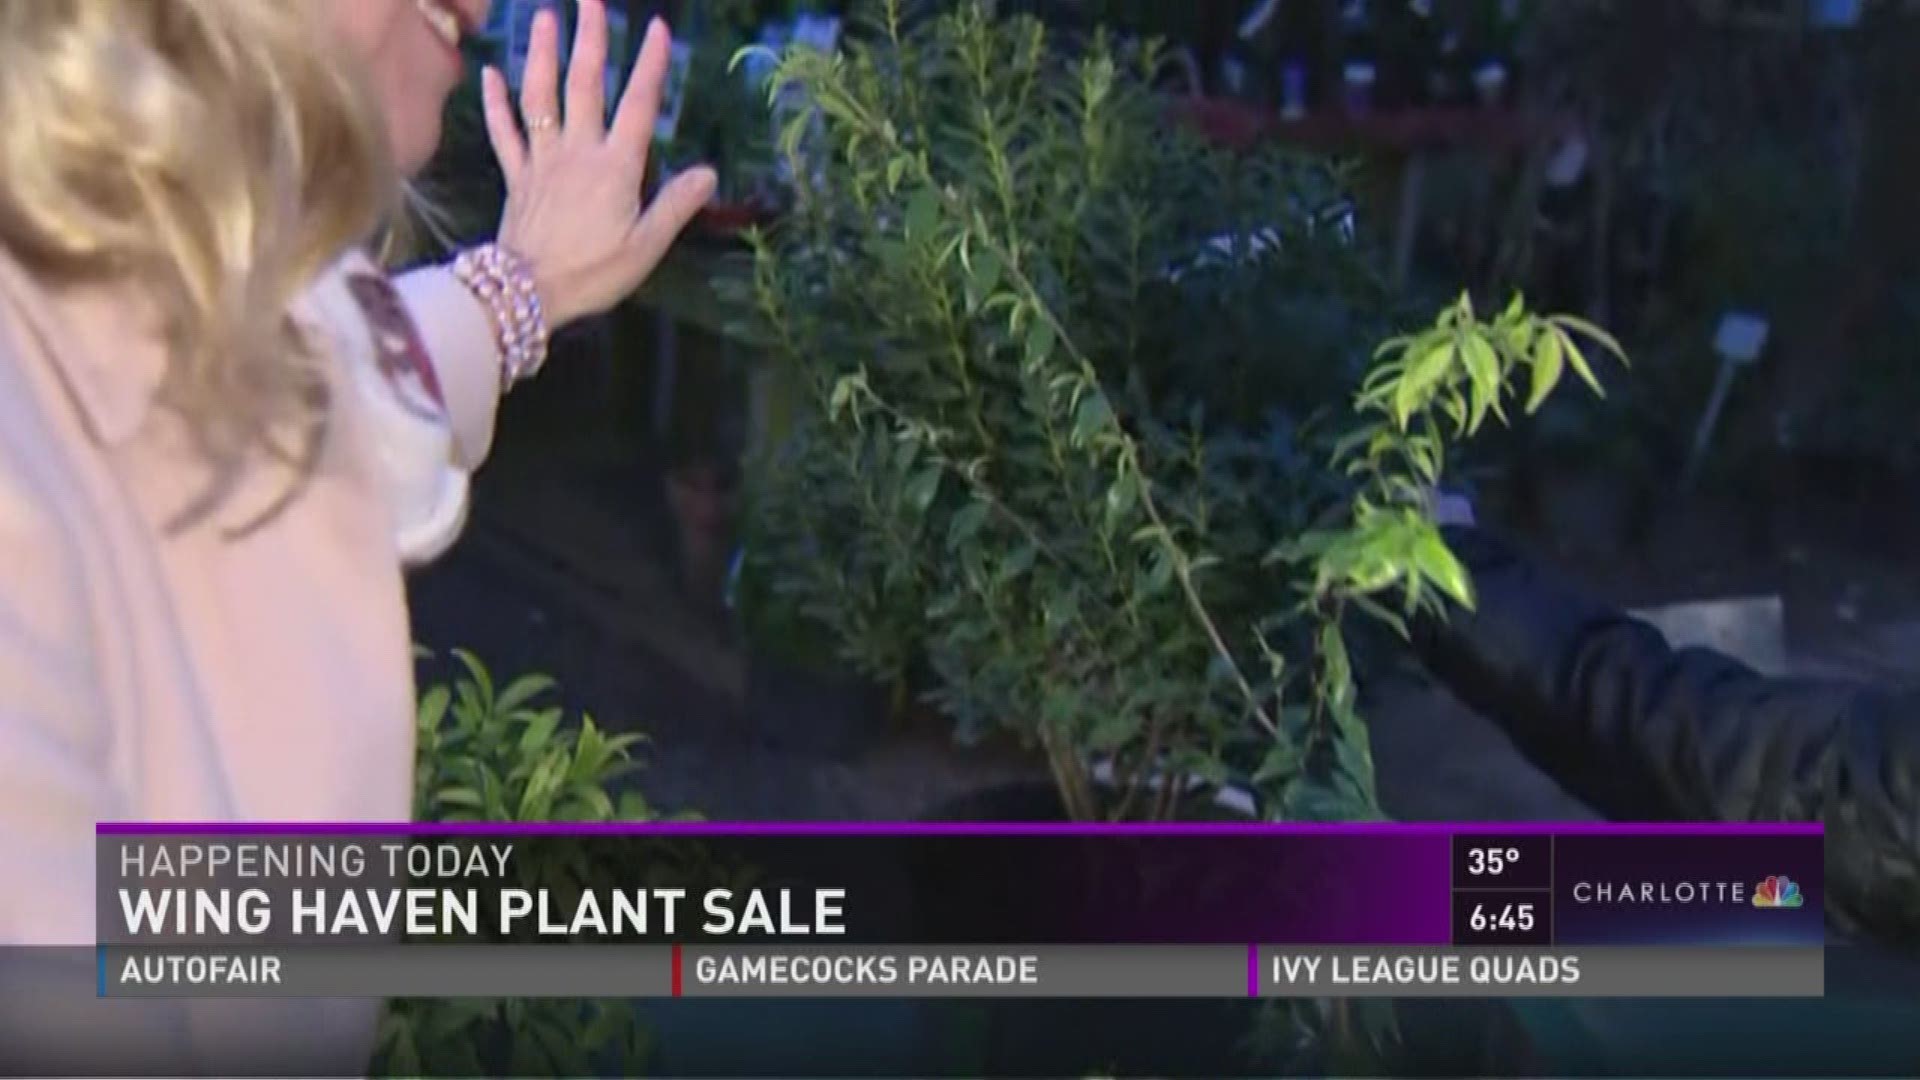 Just in time for spring planting, a Charlotte tradition is here to help spruce up your garden!